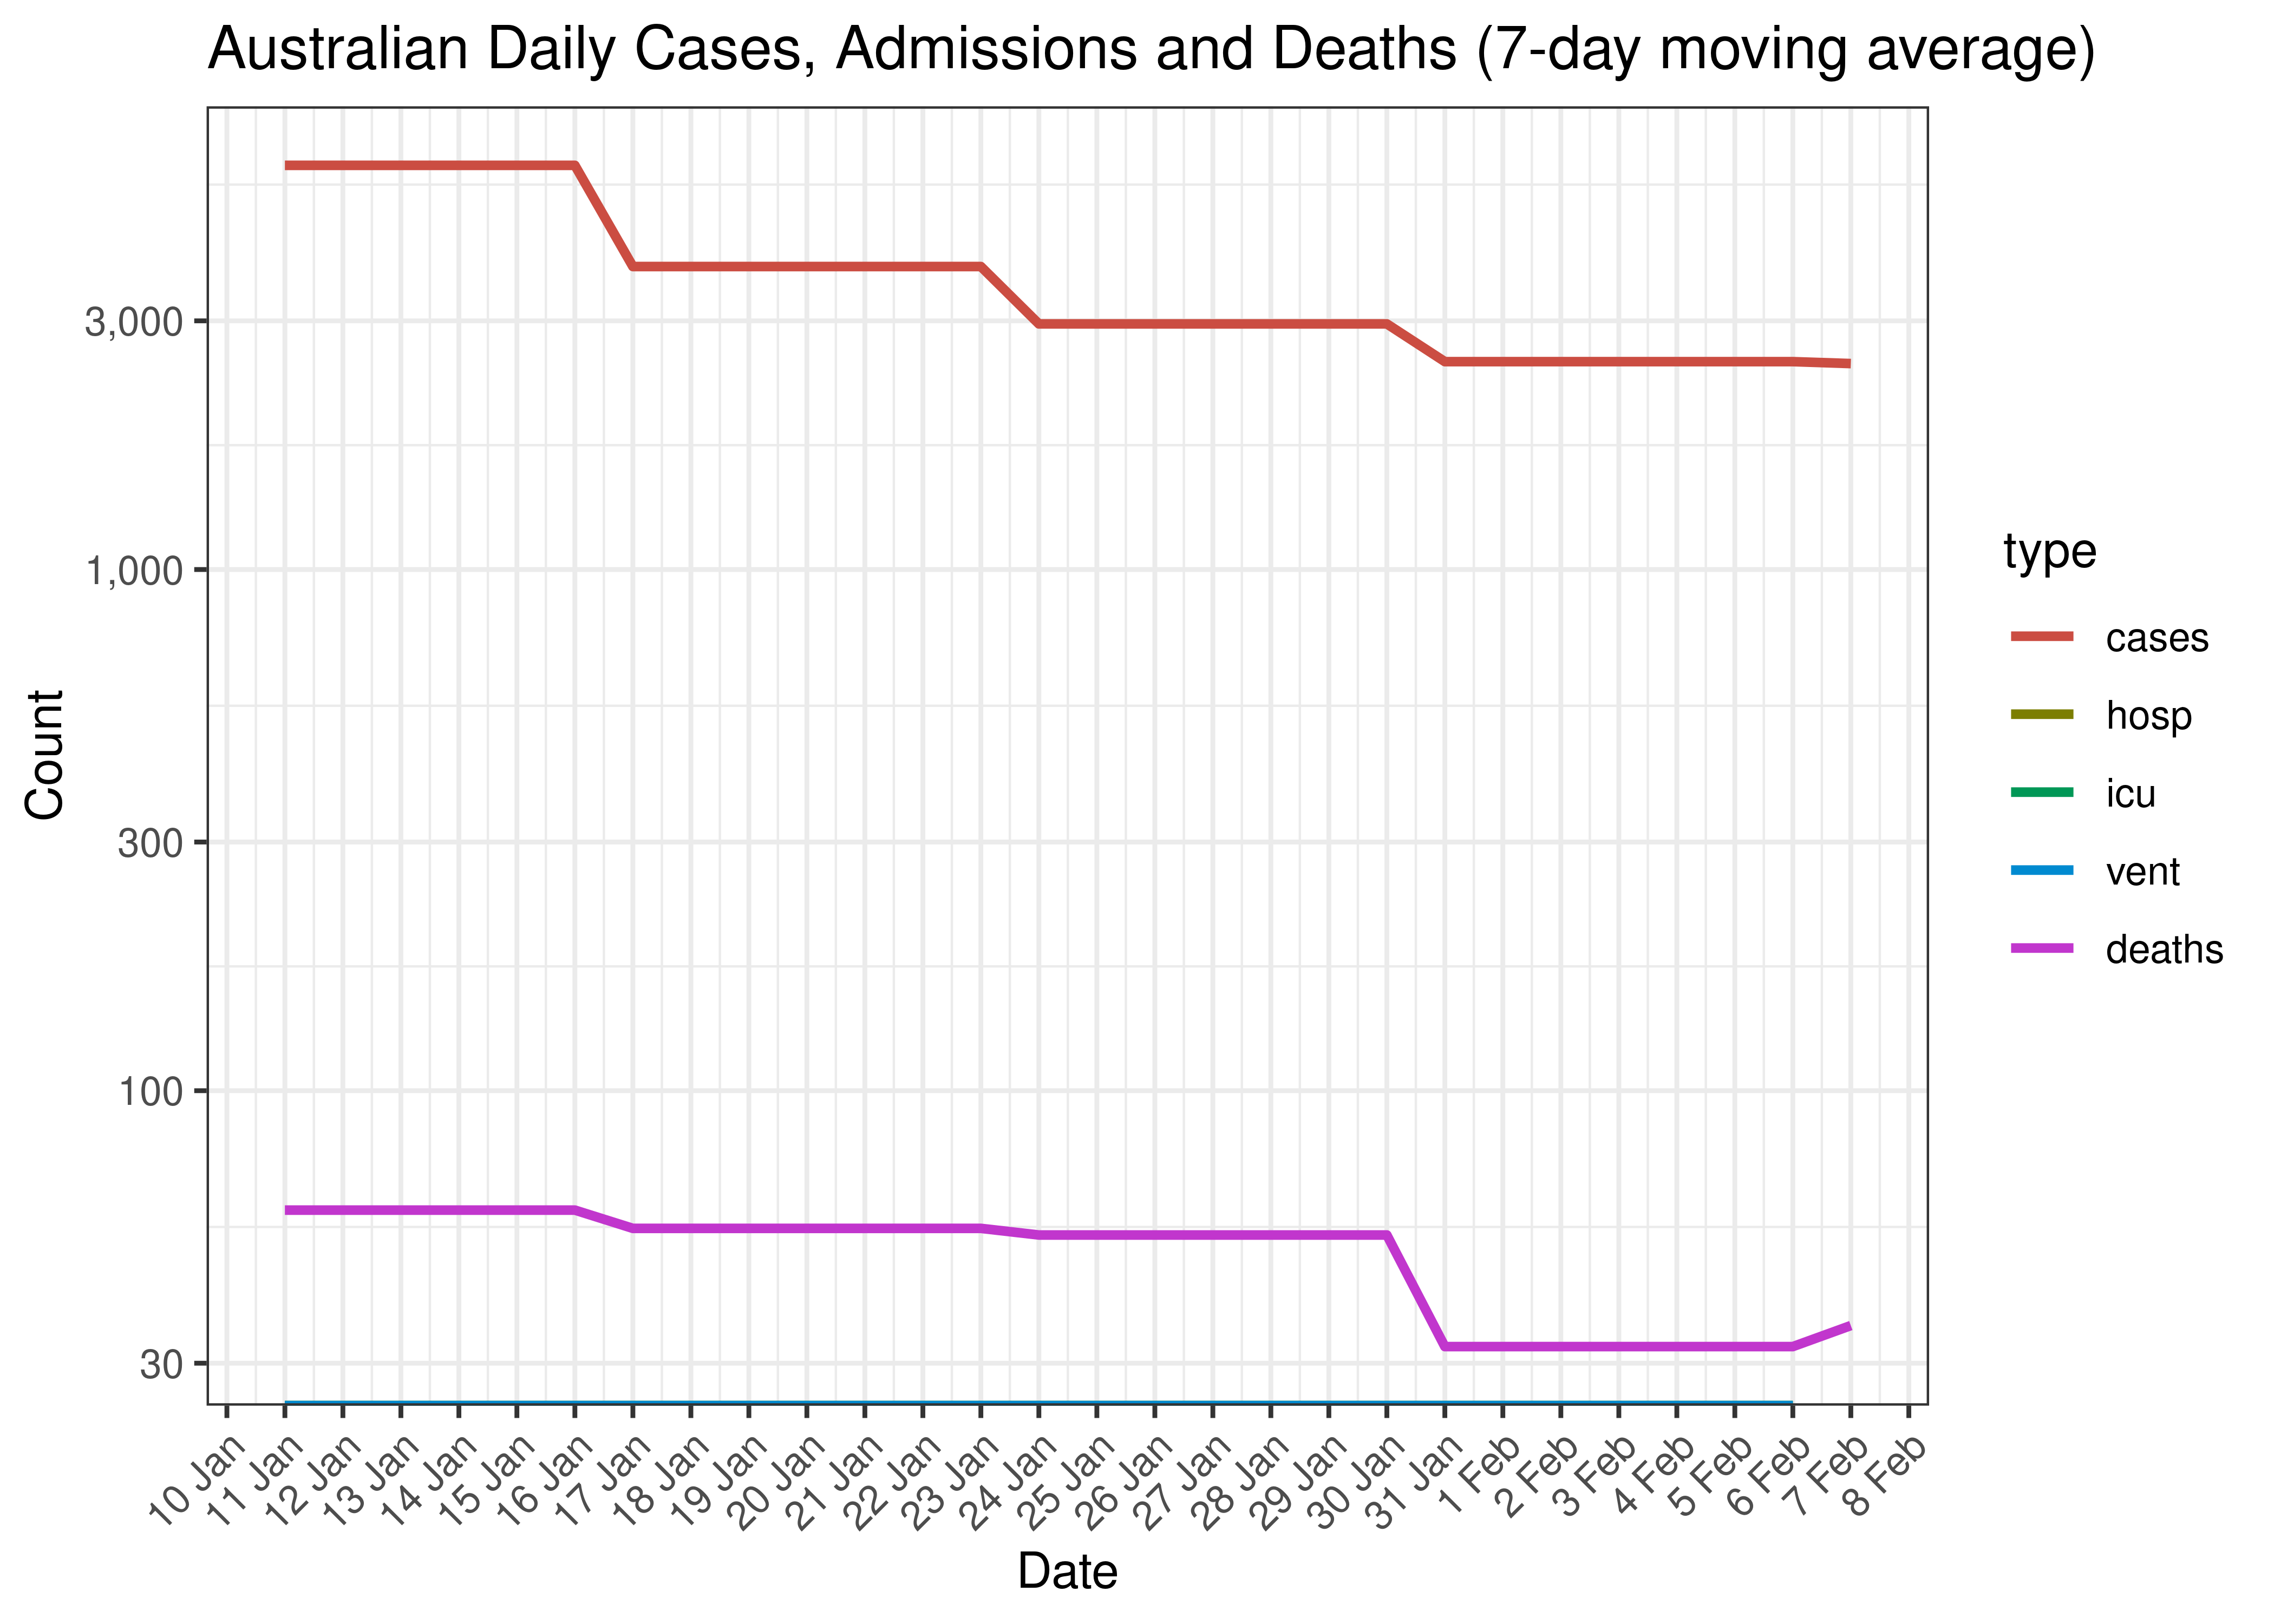 Australian Daily Cases, Admissions and Deaths for Last 30-days (7-day moving average)